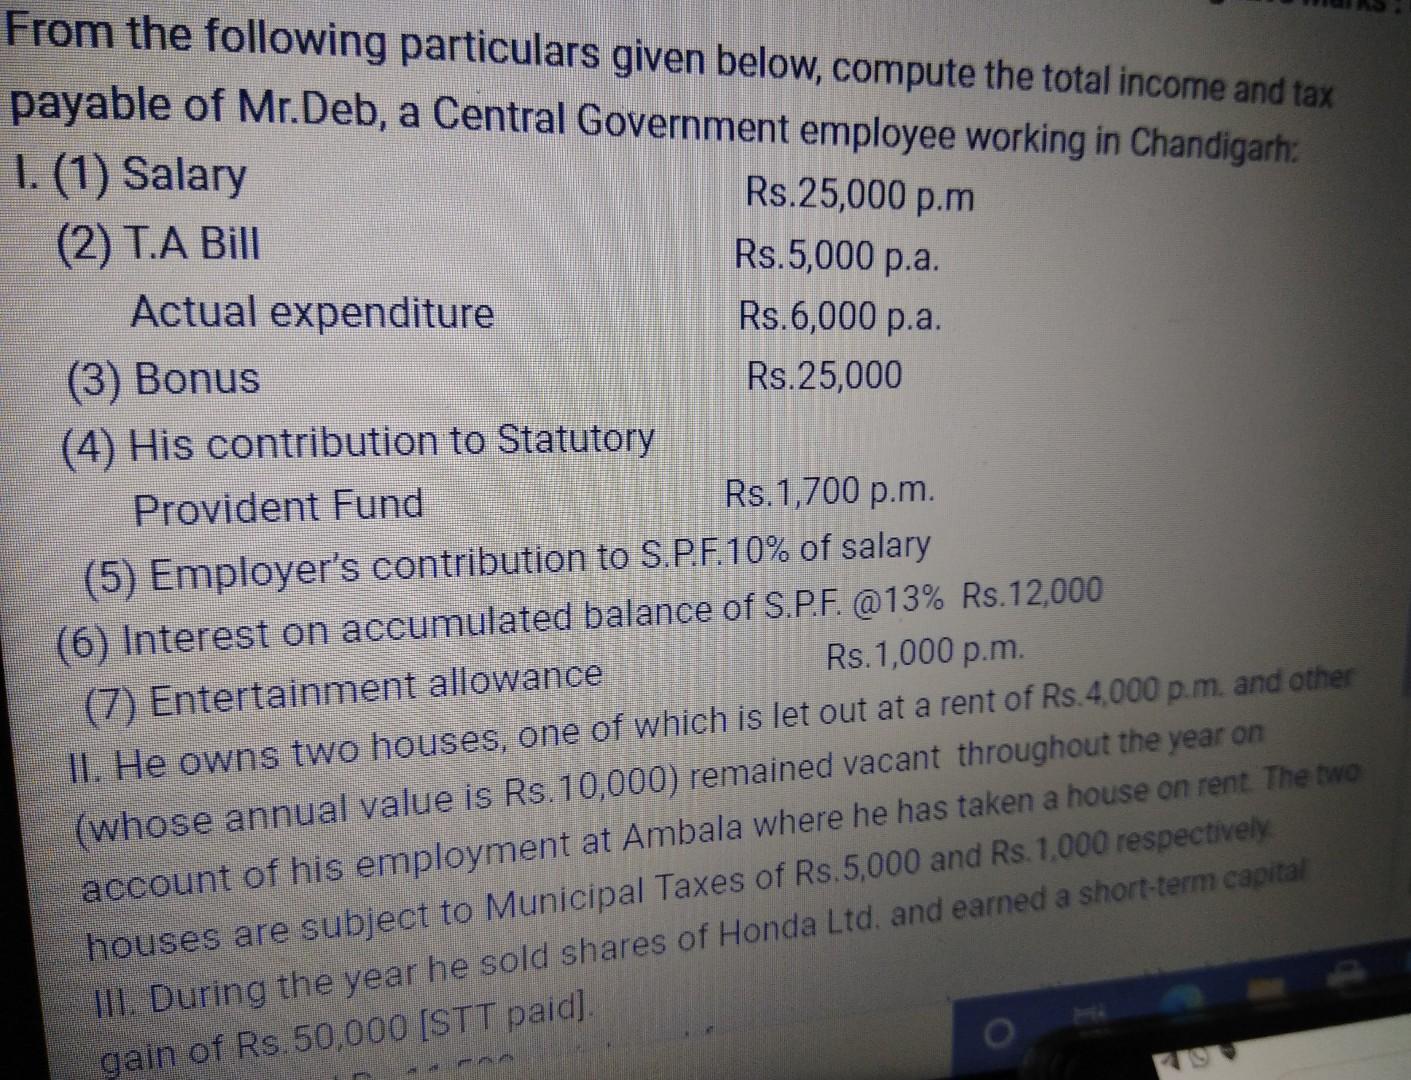 From the following particulars given below, compute the total income and tax payable of Mr.Deb, a Central